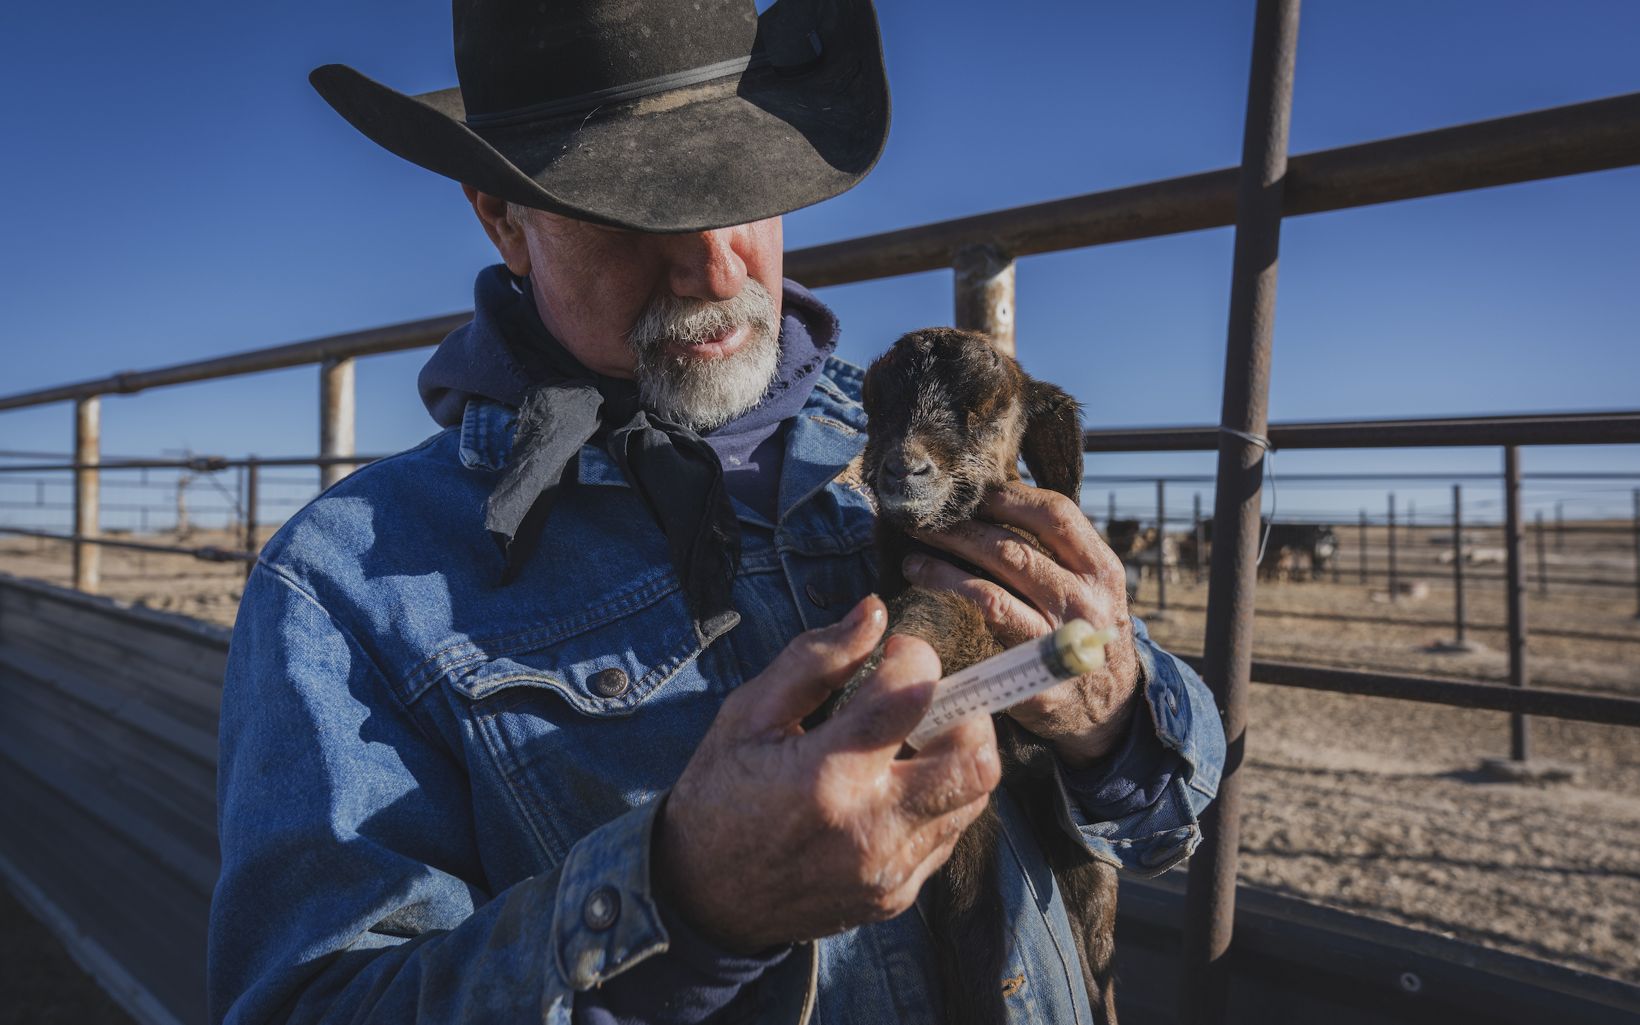 New Kid on the Ranch When Treg Hatcher first found this newborn goat, the kid was cold and unmoving. But as he checked, he felt a slight stirring and immediately went into protector mode. © Morgan Heim 